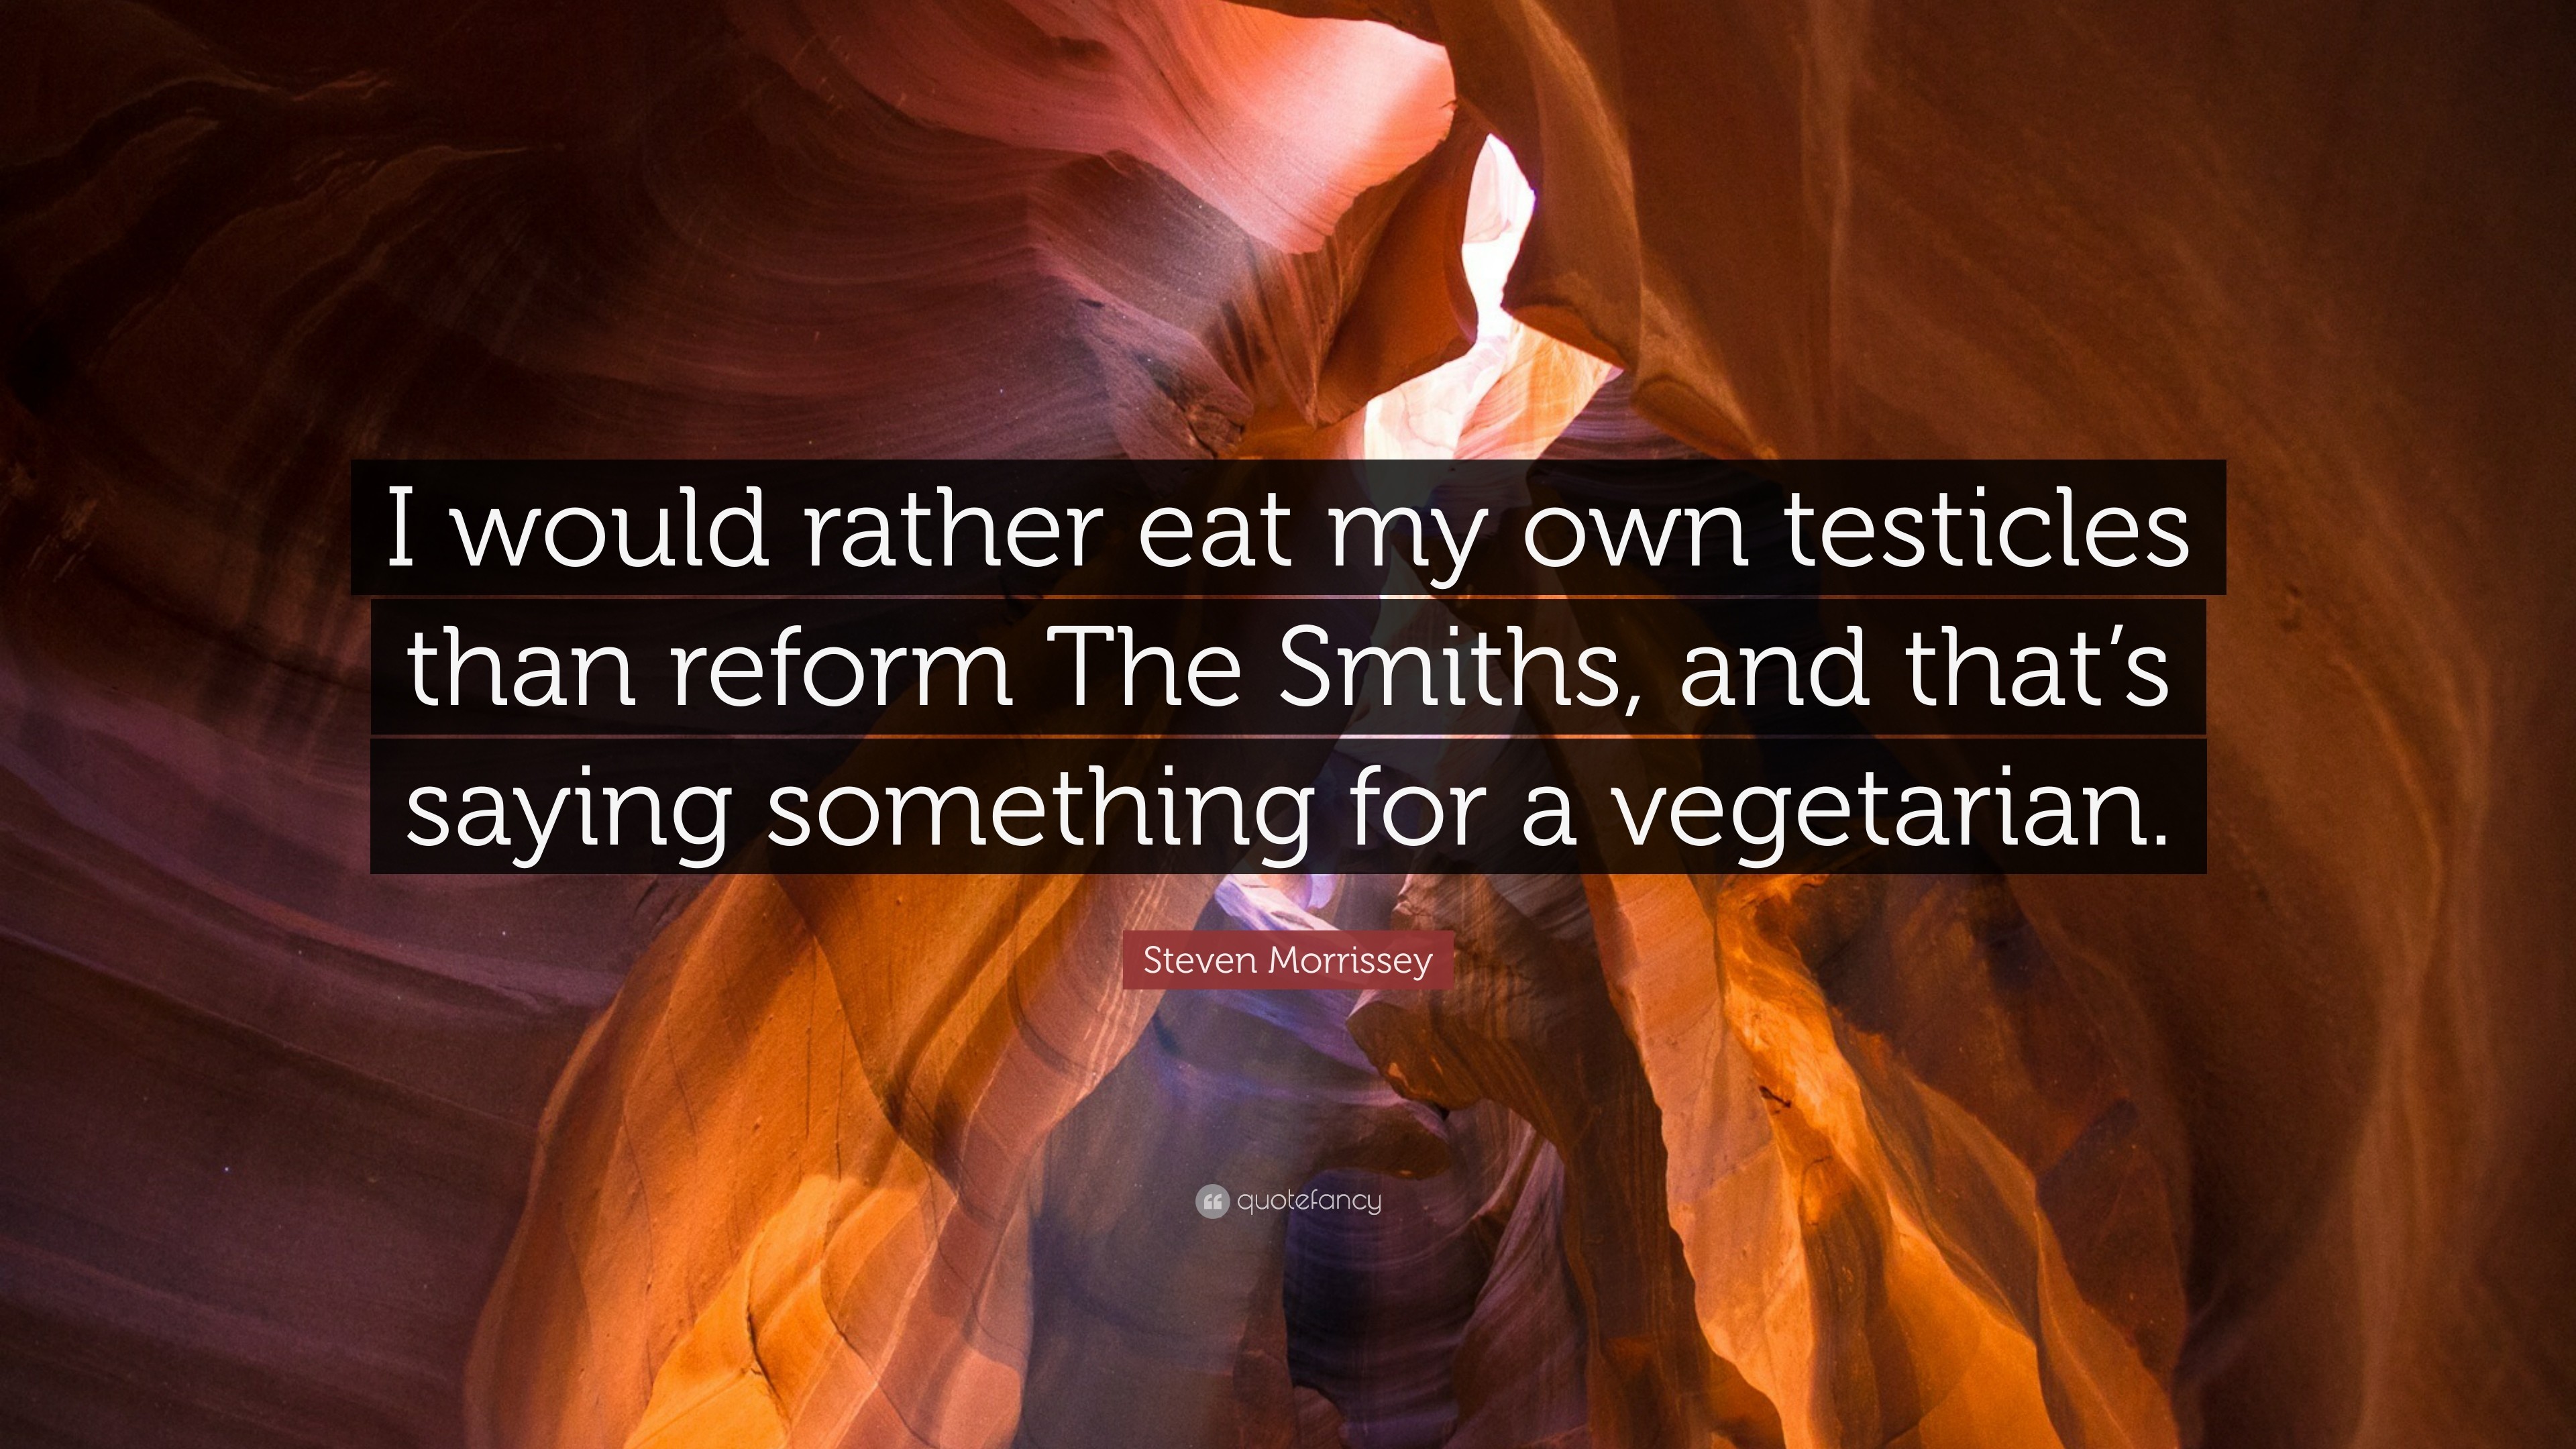 Steven Morrissey Quote I would rather eat my own testicles than reform The Smiths